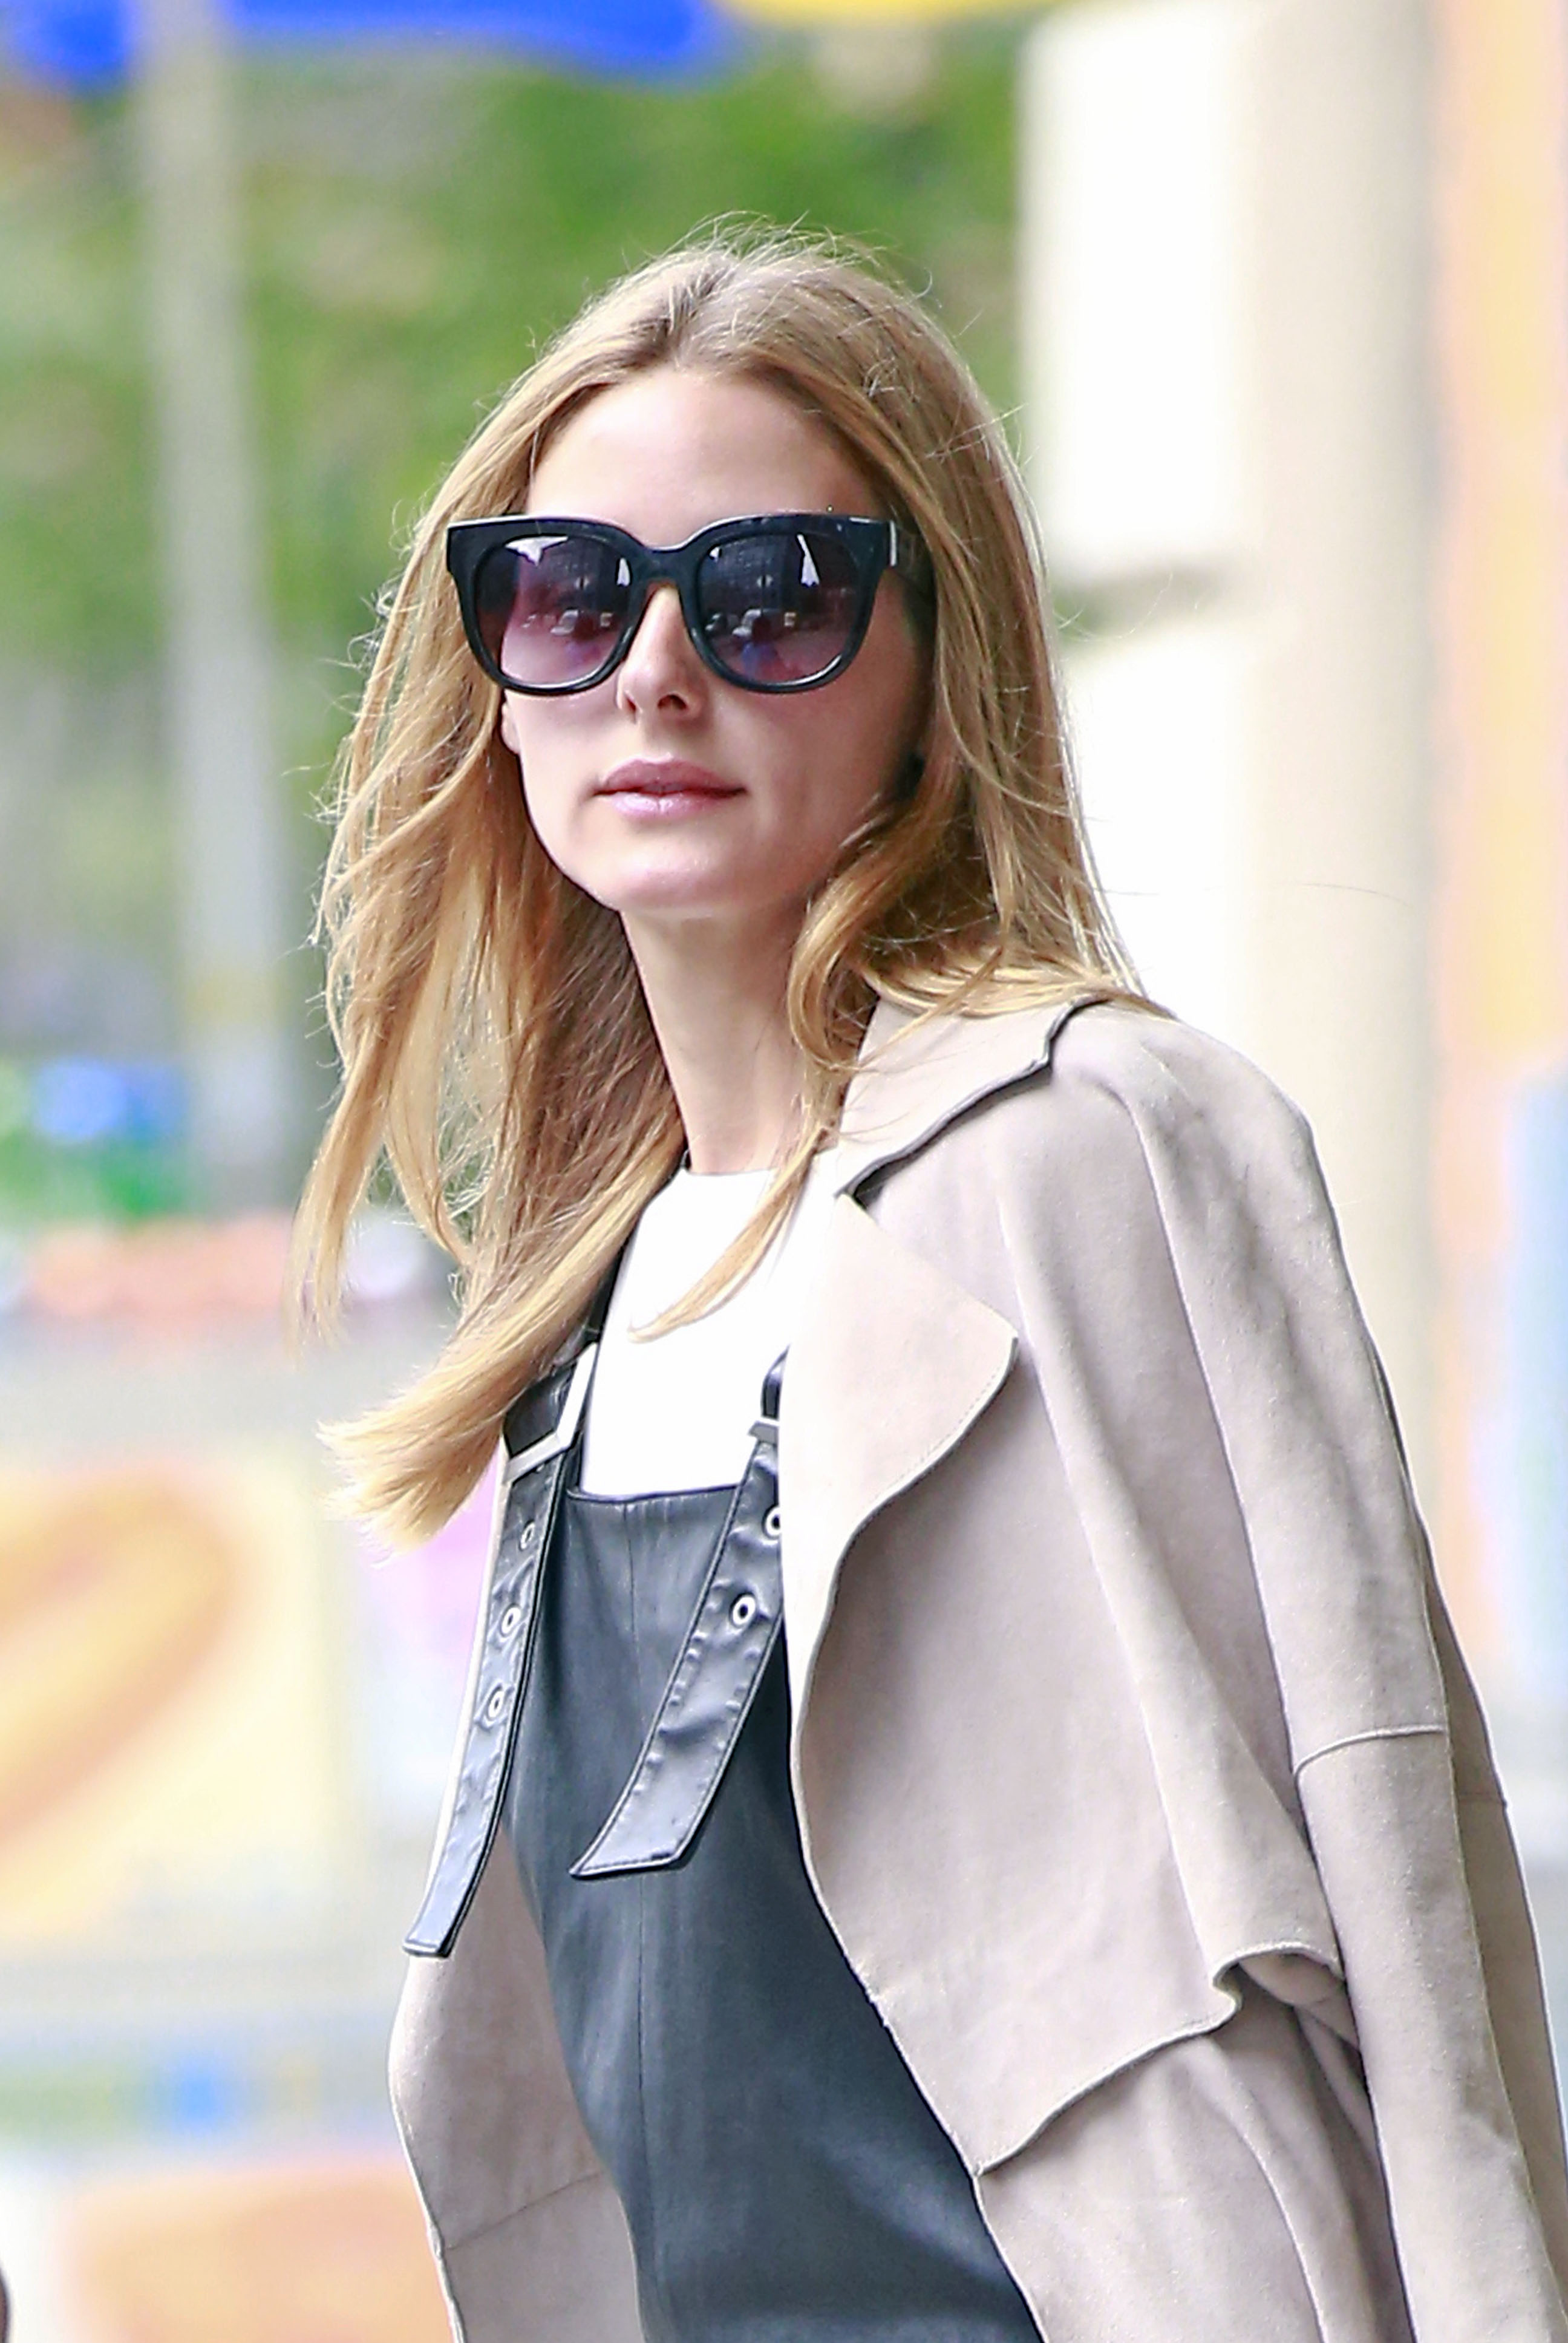 Olivia Palermo out in New York City